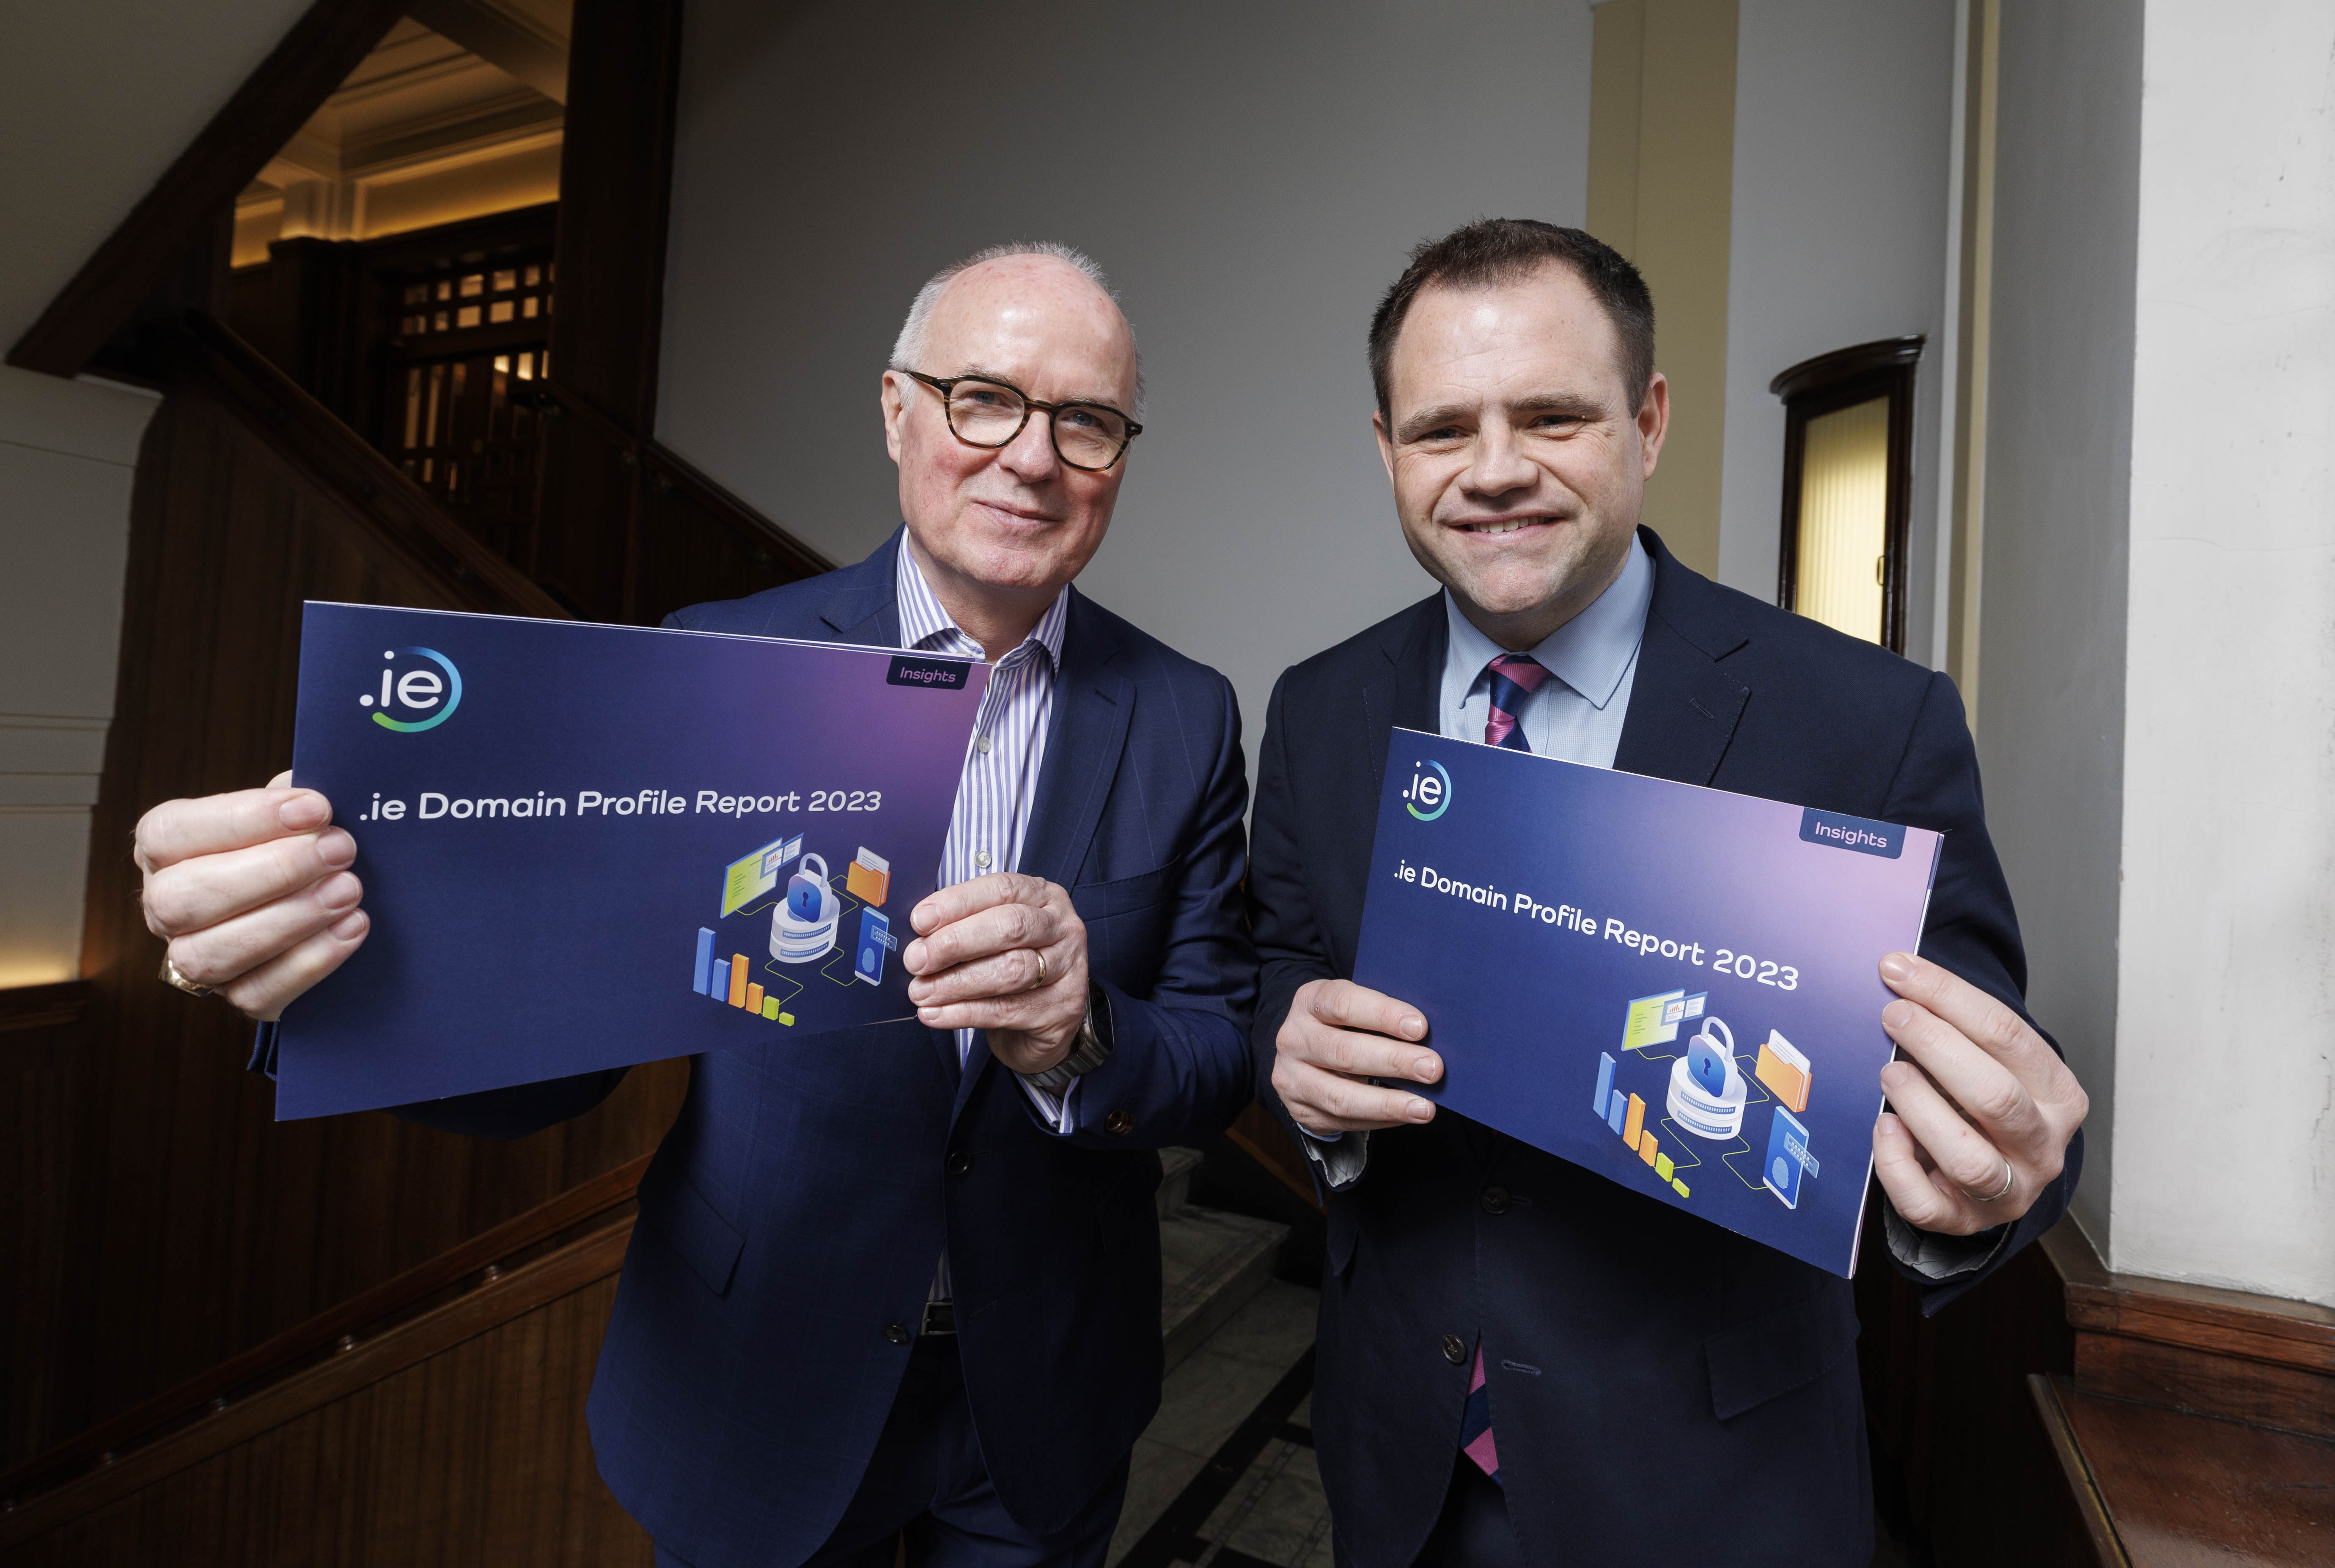 Press Release | Launch of the .ie Domain Profile Report 2023